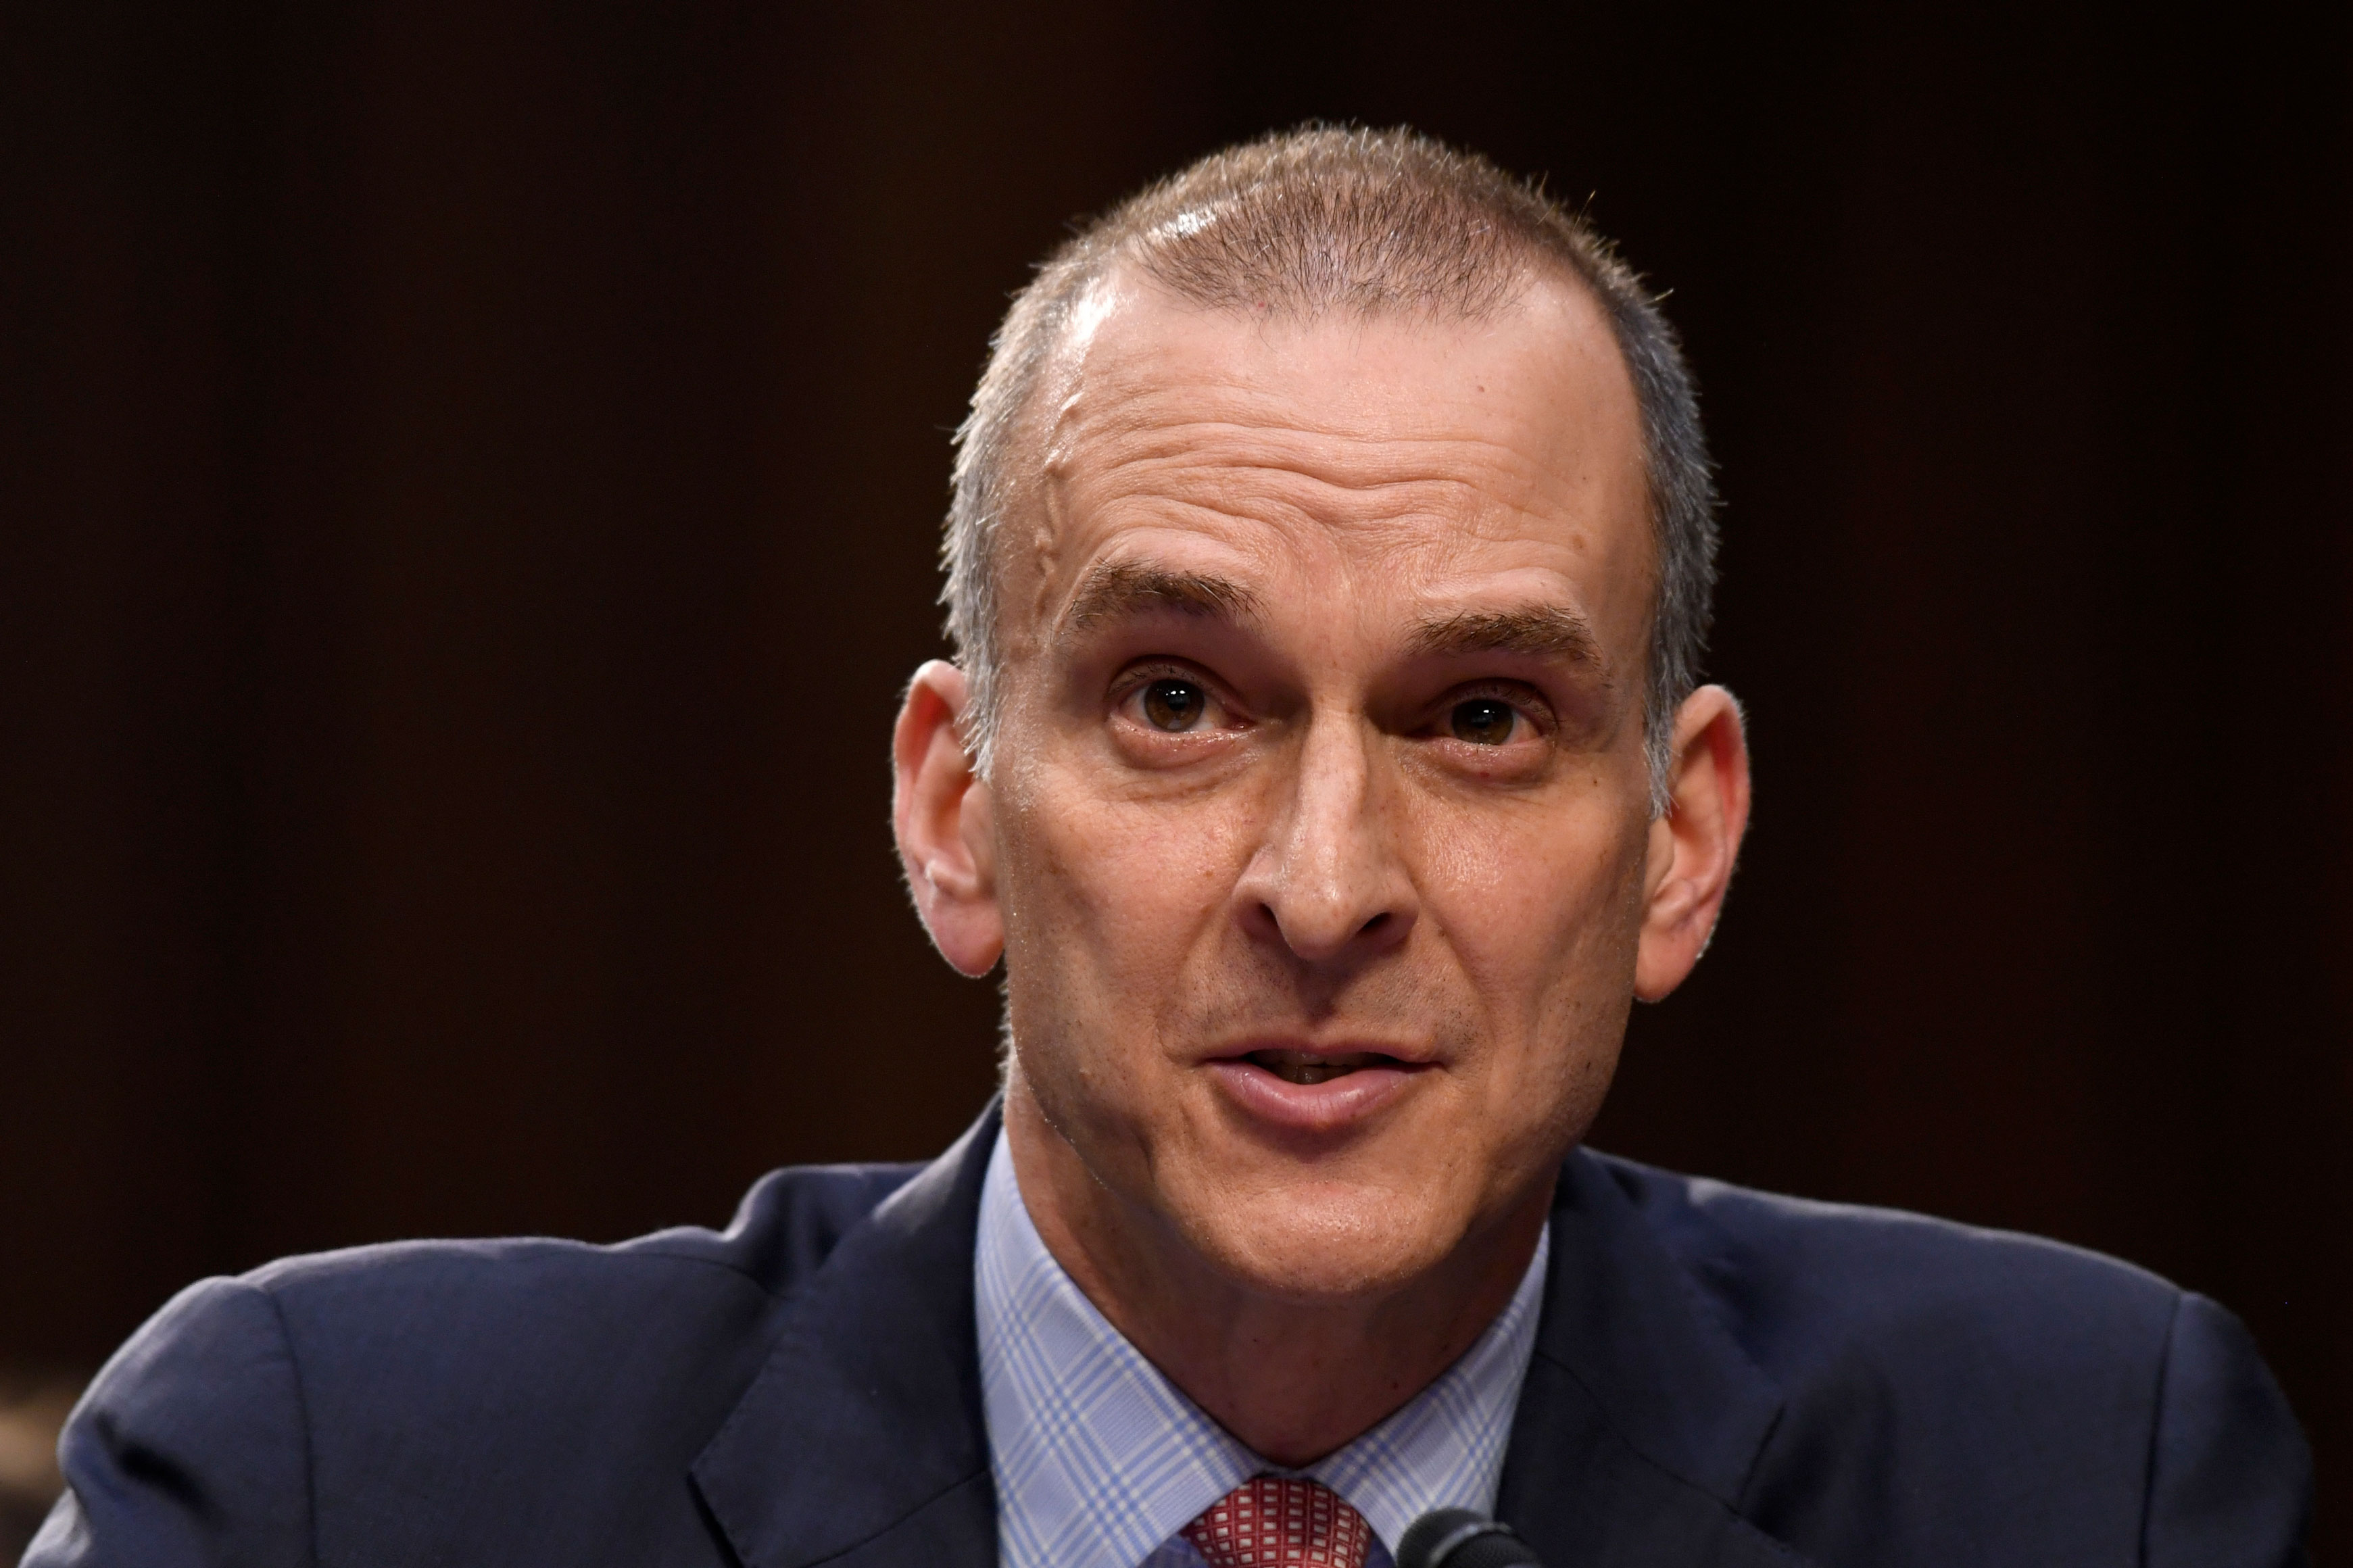 File photo of US Anti-Doping Agency Chief Executive Officer Travis Tygart, from a senate hearing on Feb. 5, 2020.